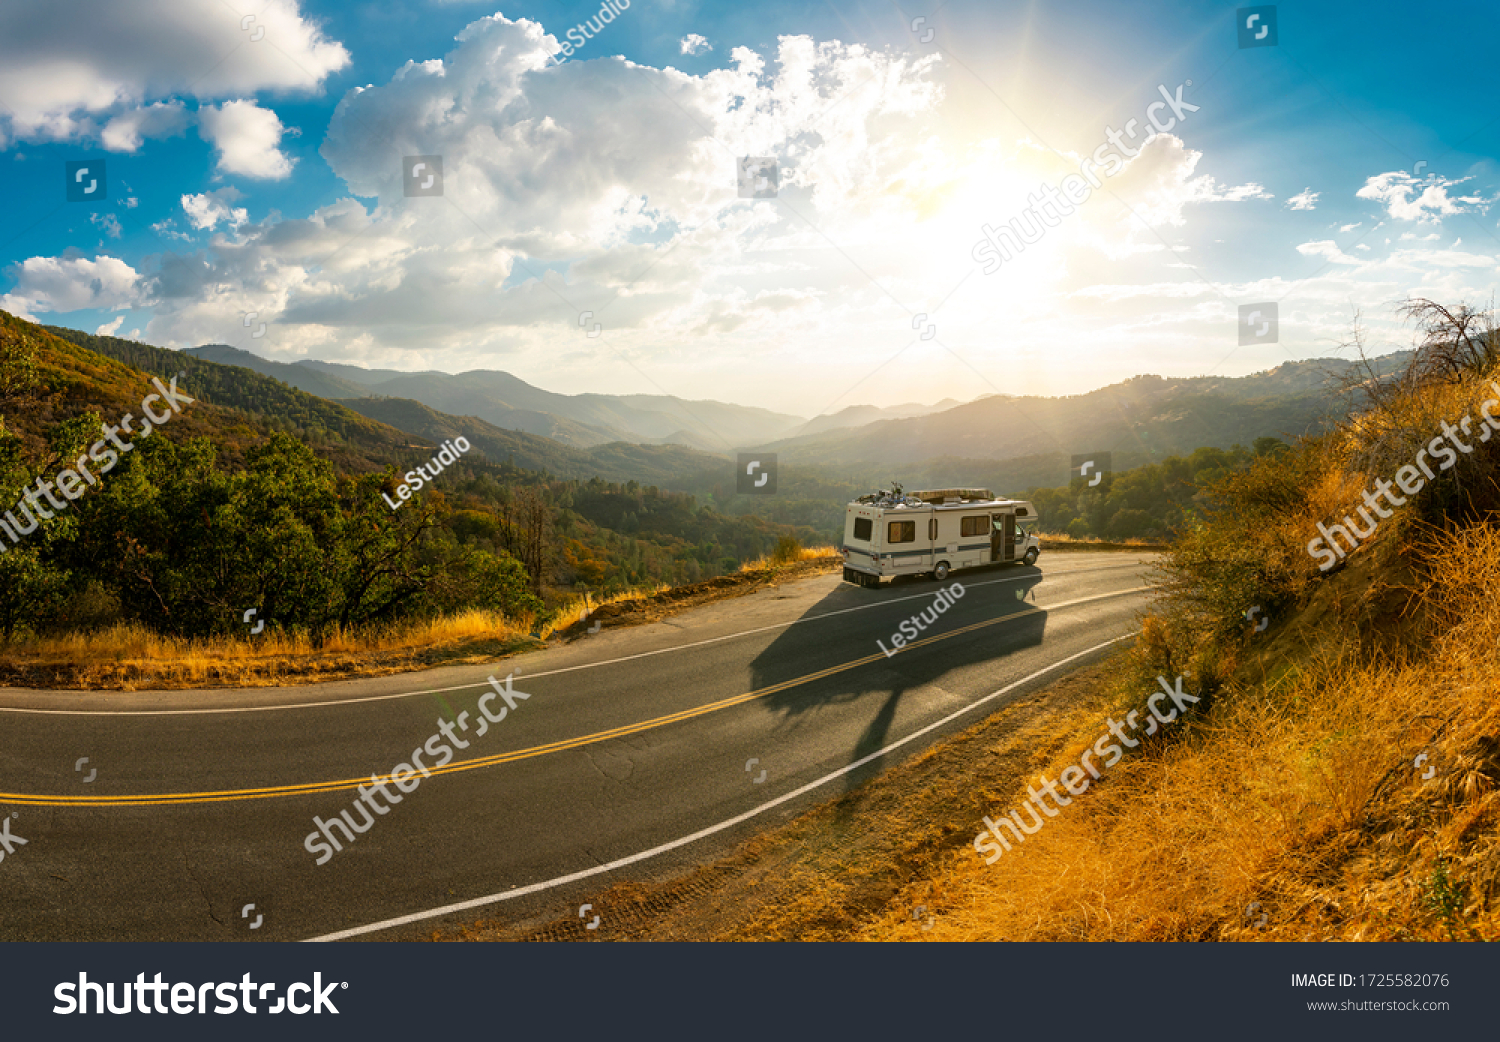 Epic nature mountain view with a road side parked RV motorhome. Travelling lifestyle roadtrip adventure in the USA #1725582076